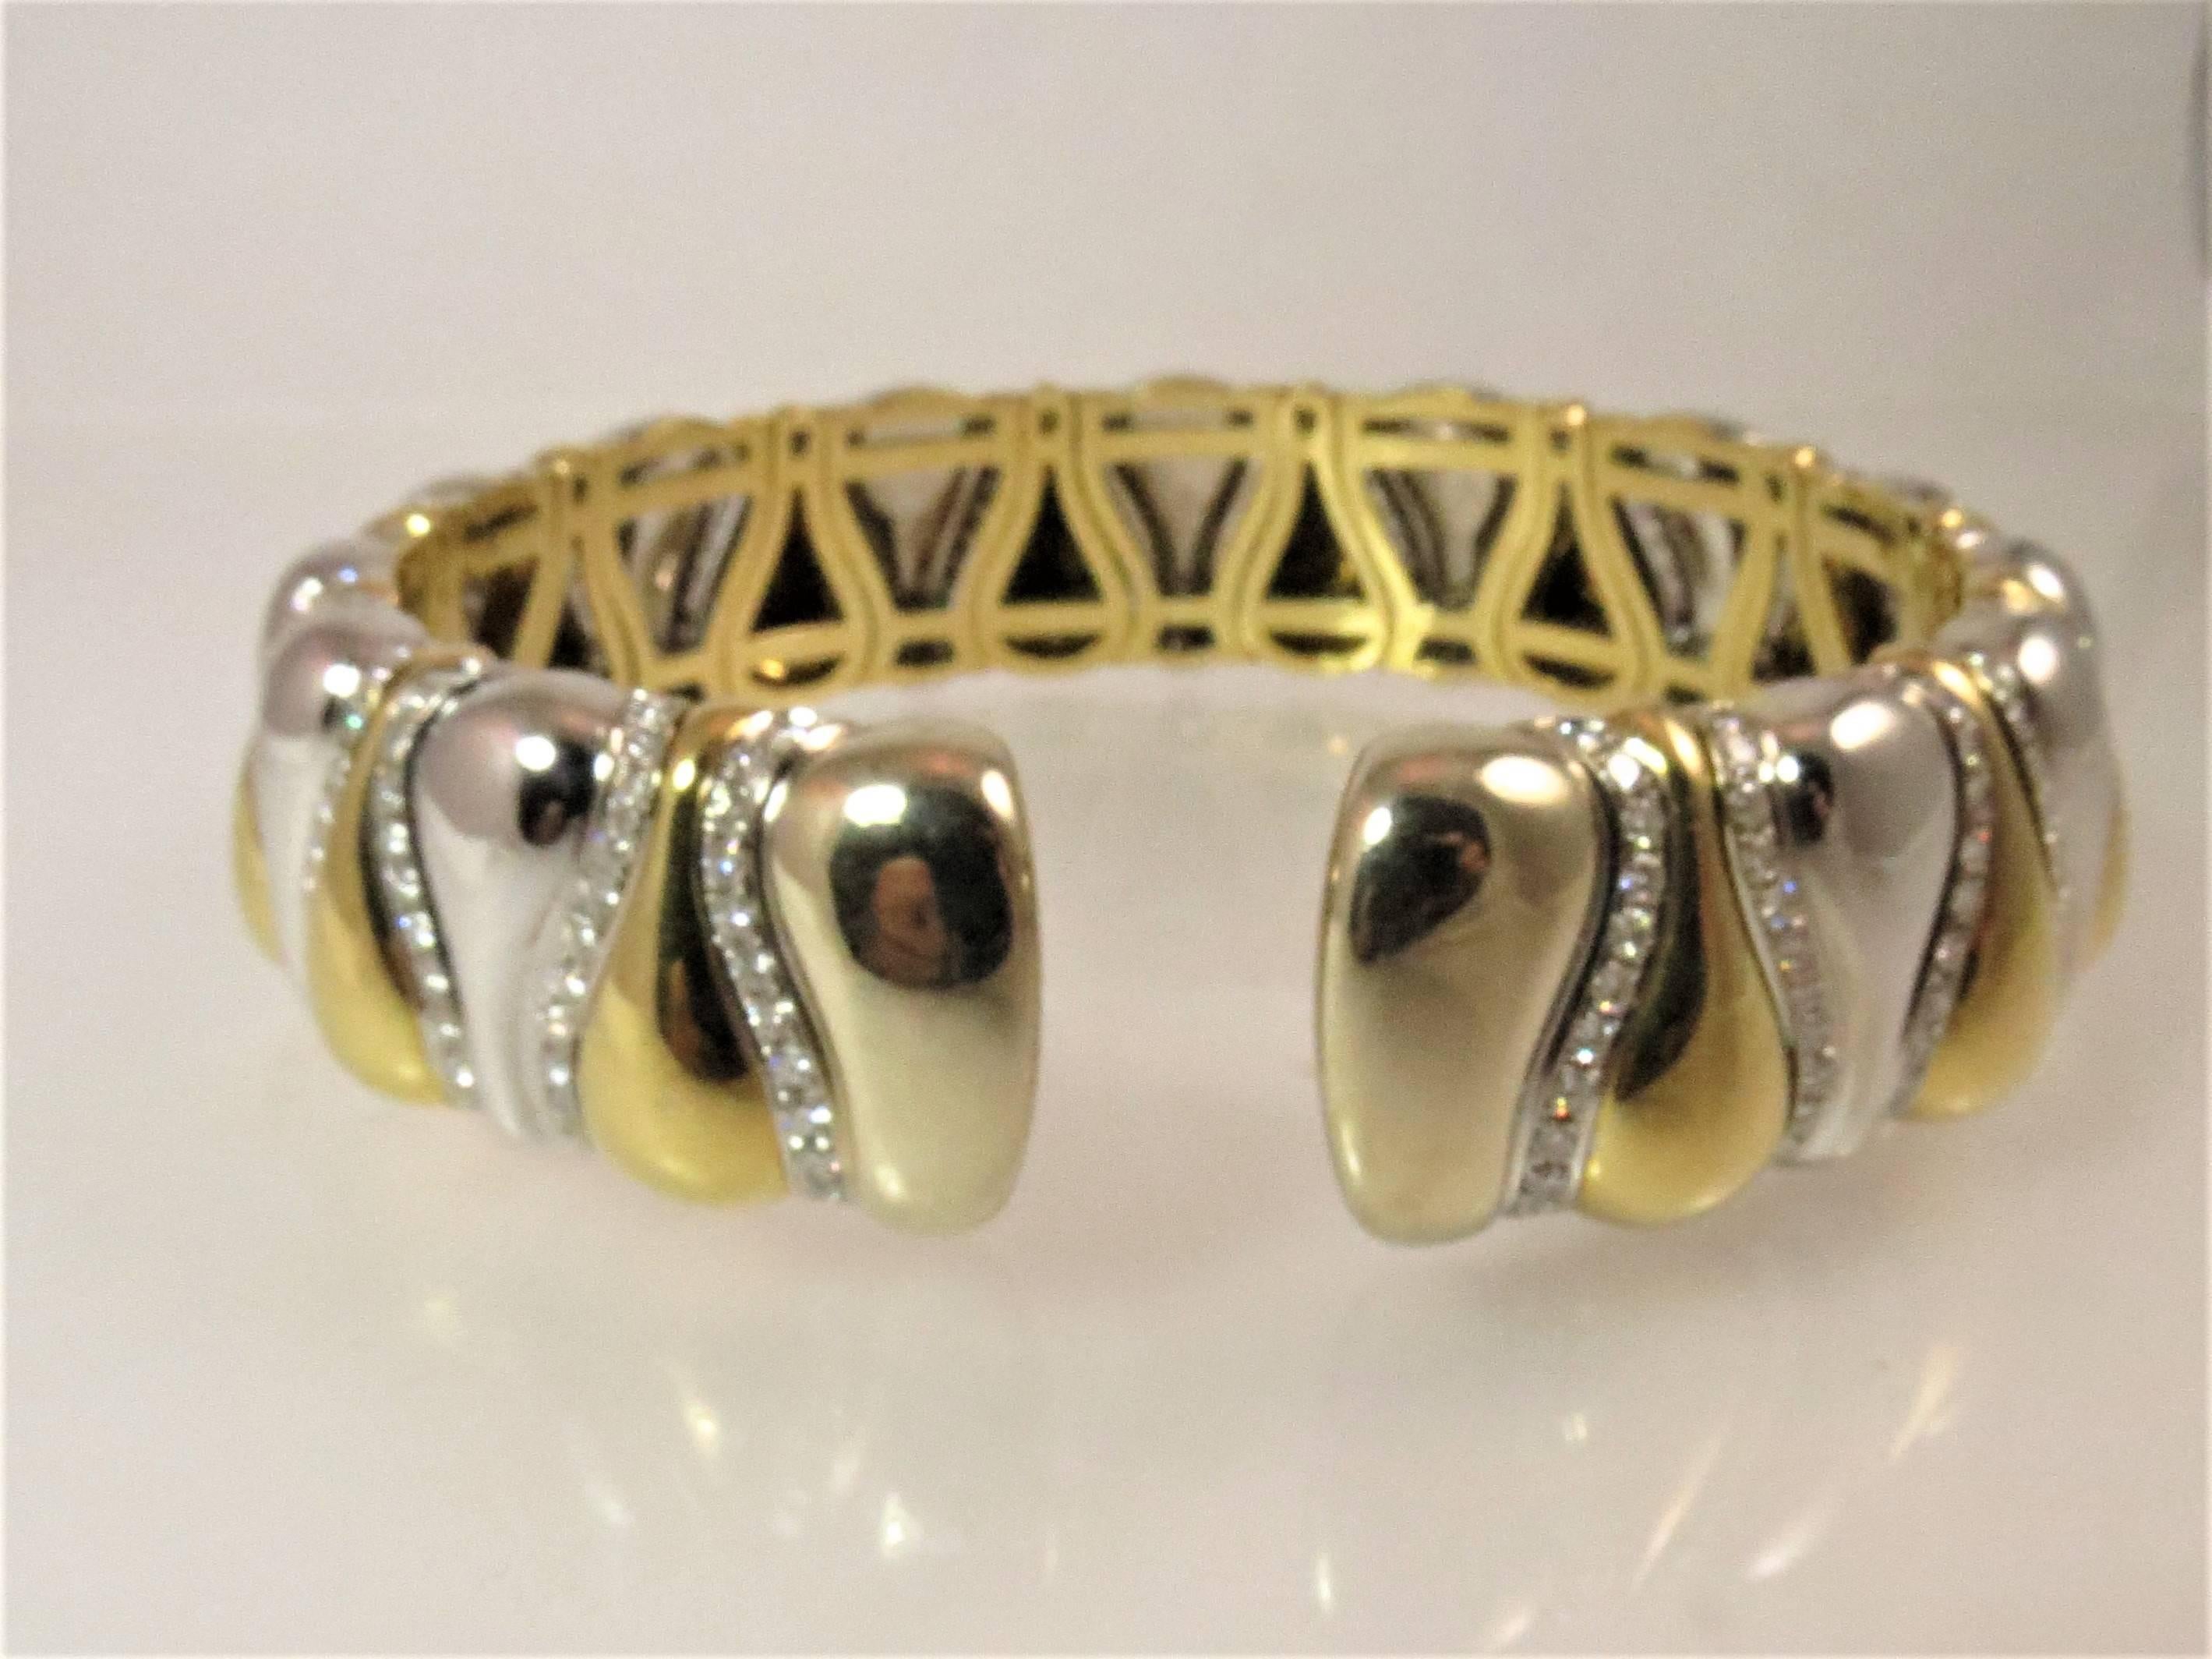 Stunning 18K yellow and white gold choker set with 308 full cut round diamonds  weighing 13.29cts, G-H color, VS clarity.